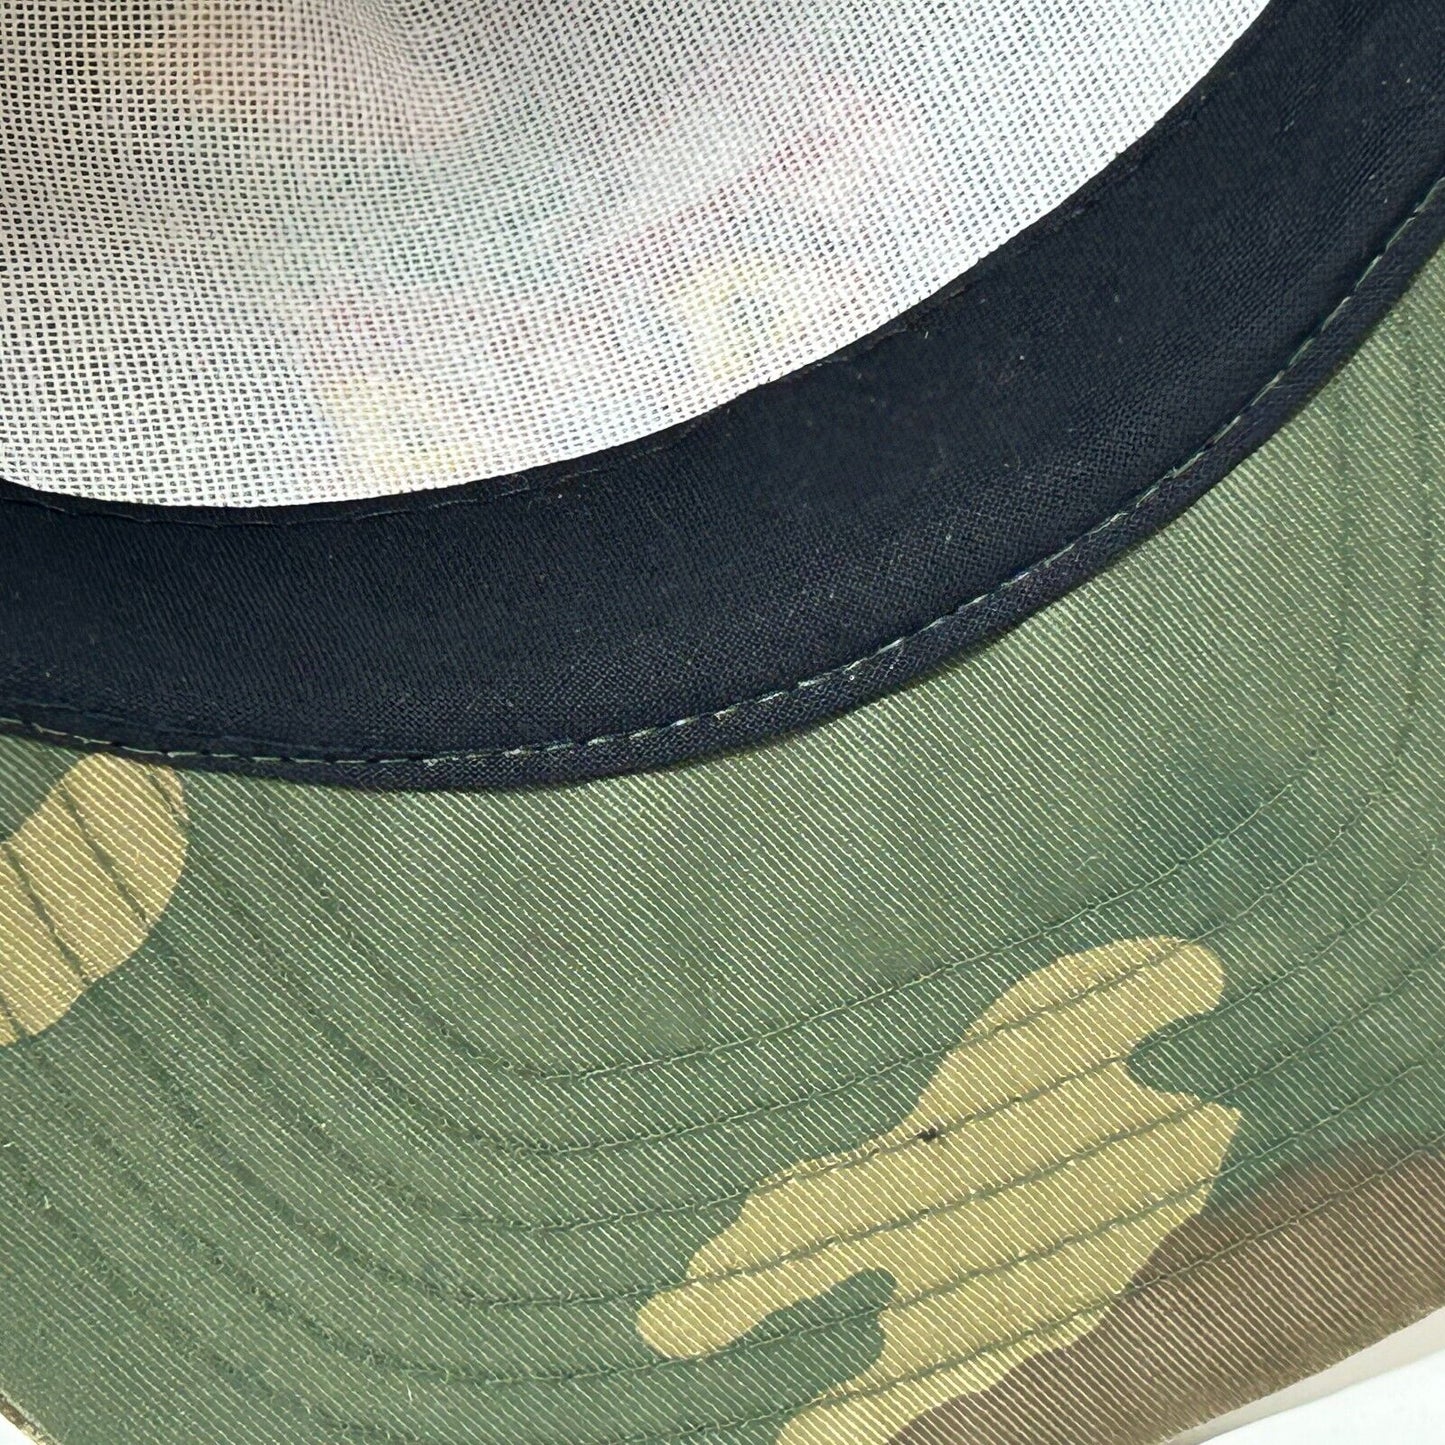 Quaker State 4x4 Truck Hat Vintage 80s Green Camouflage Snapback Baseball Cap